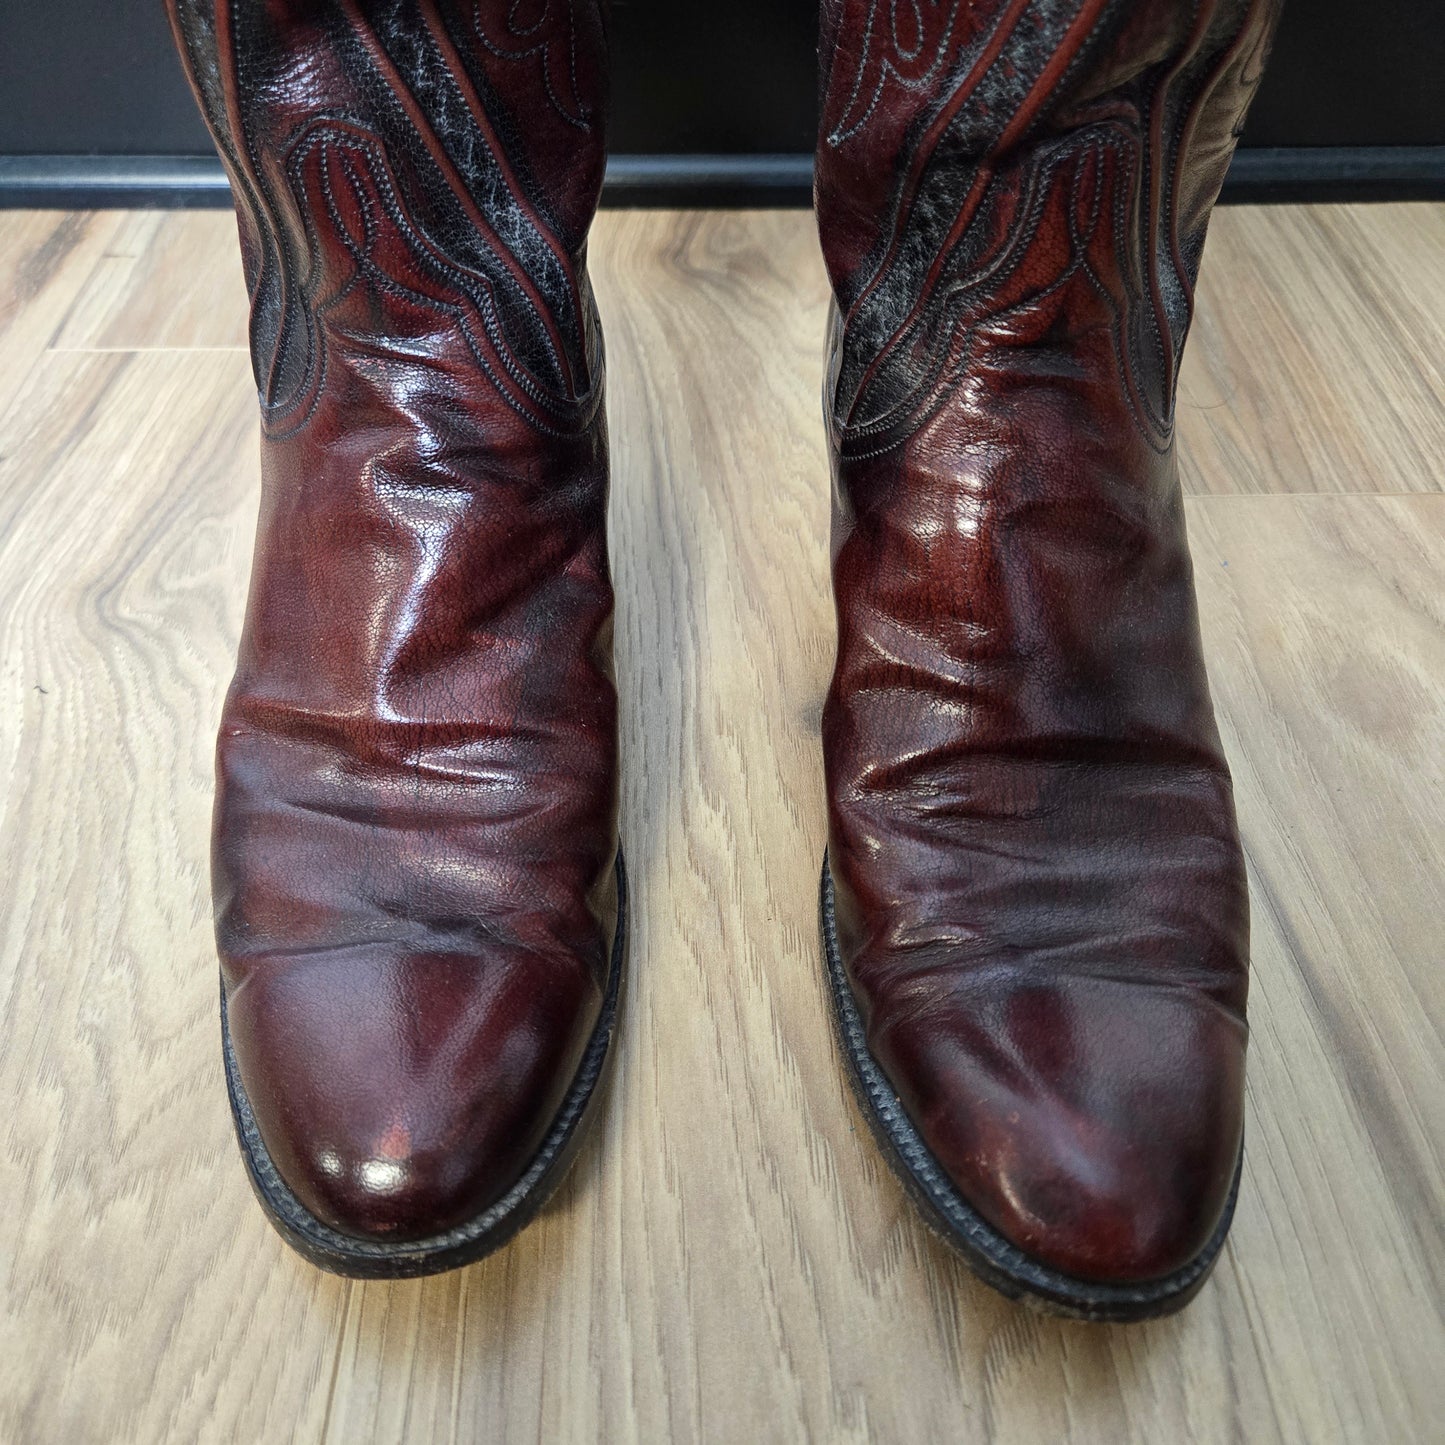 Lucchese San Antonio Black Cherry Leather Western Boots